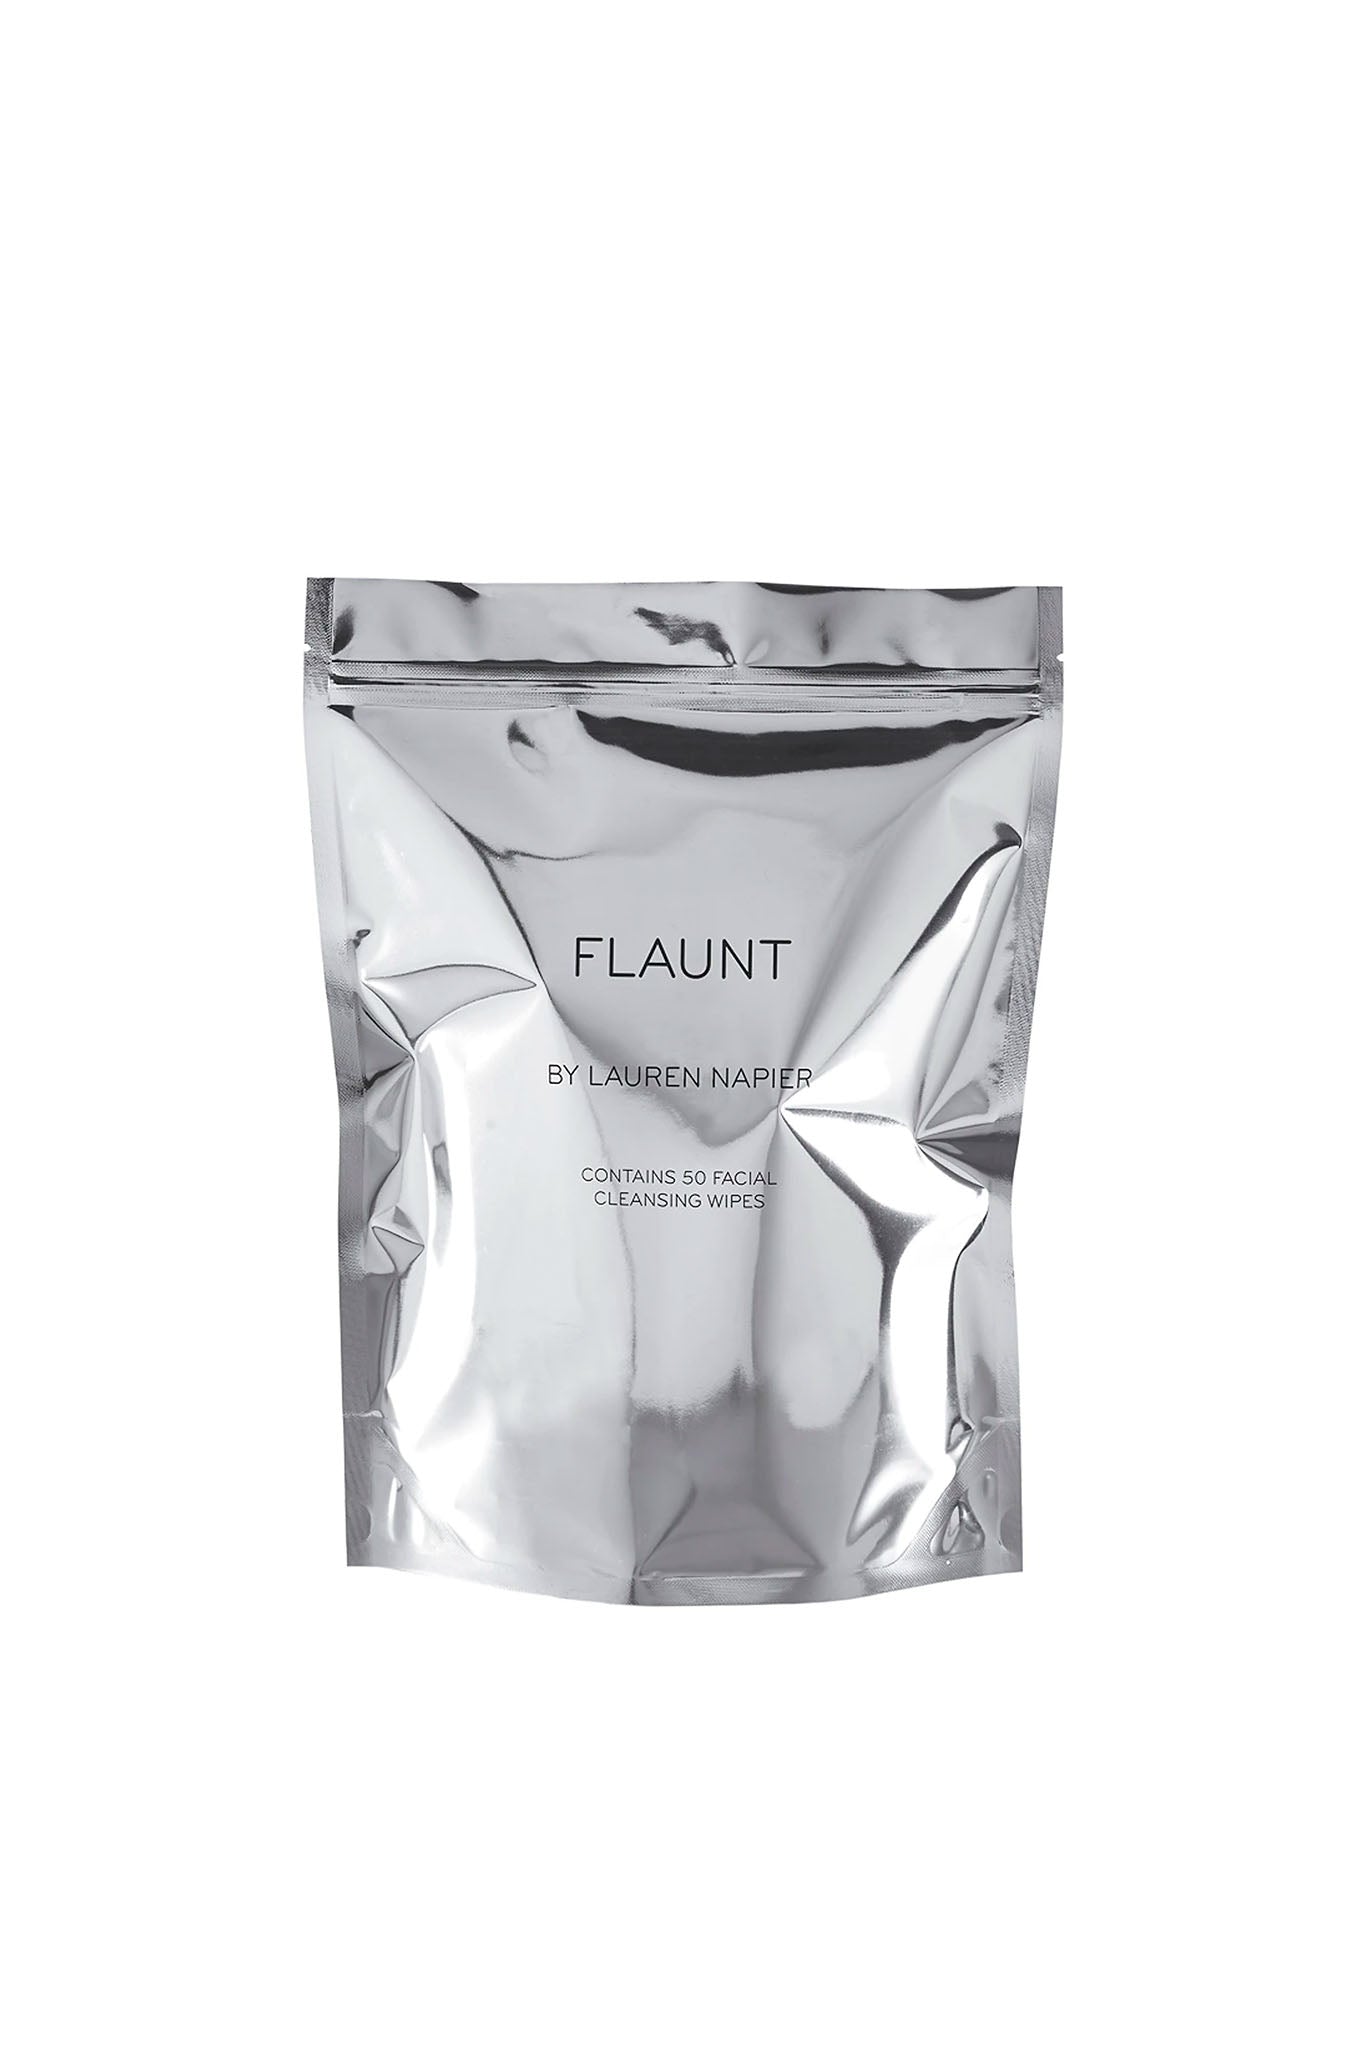 Flaunt Facial Cleansing Wipes